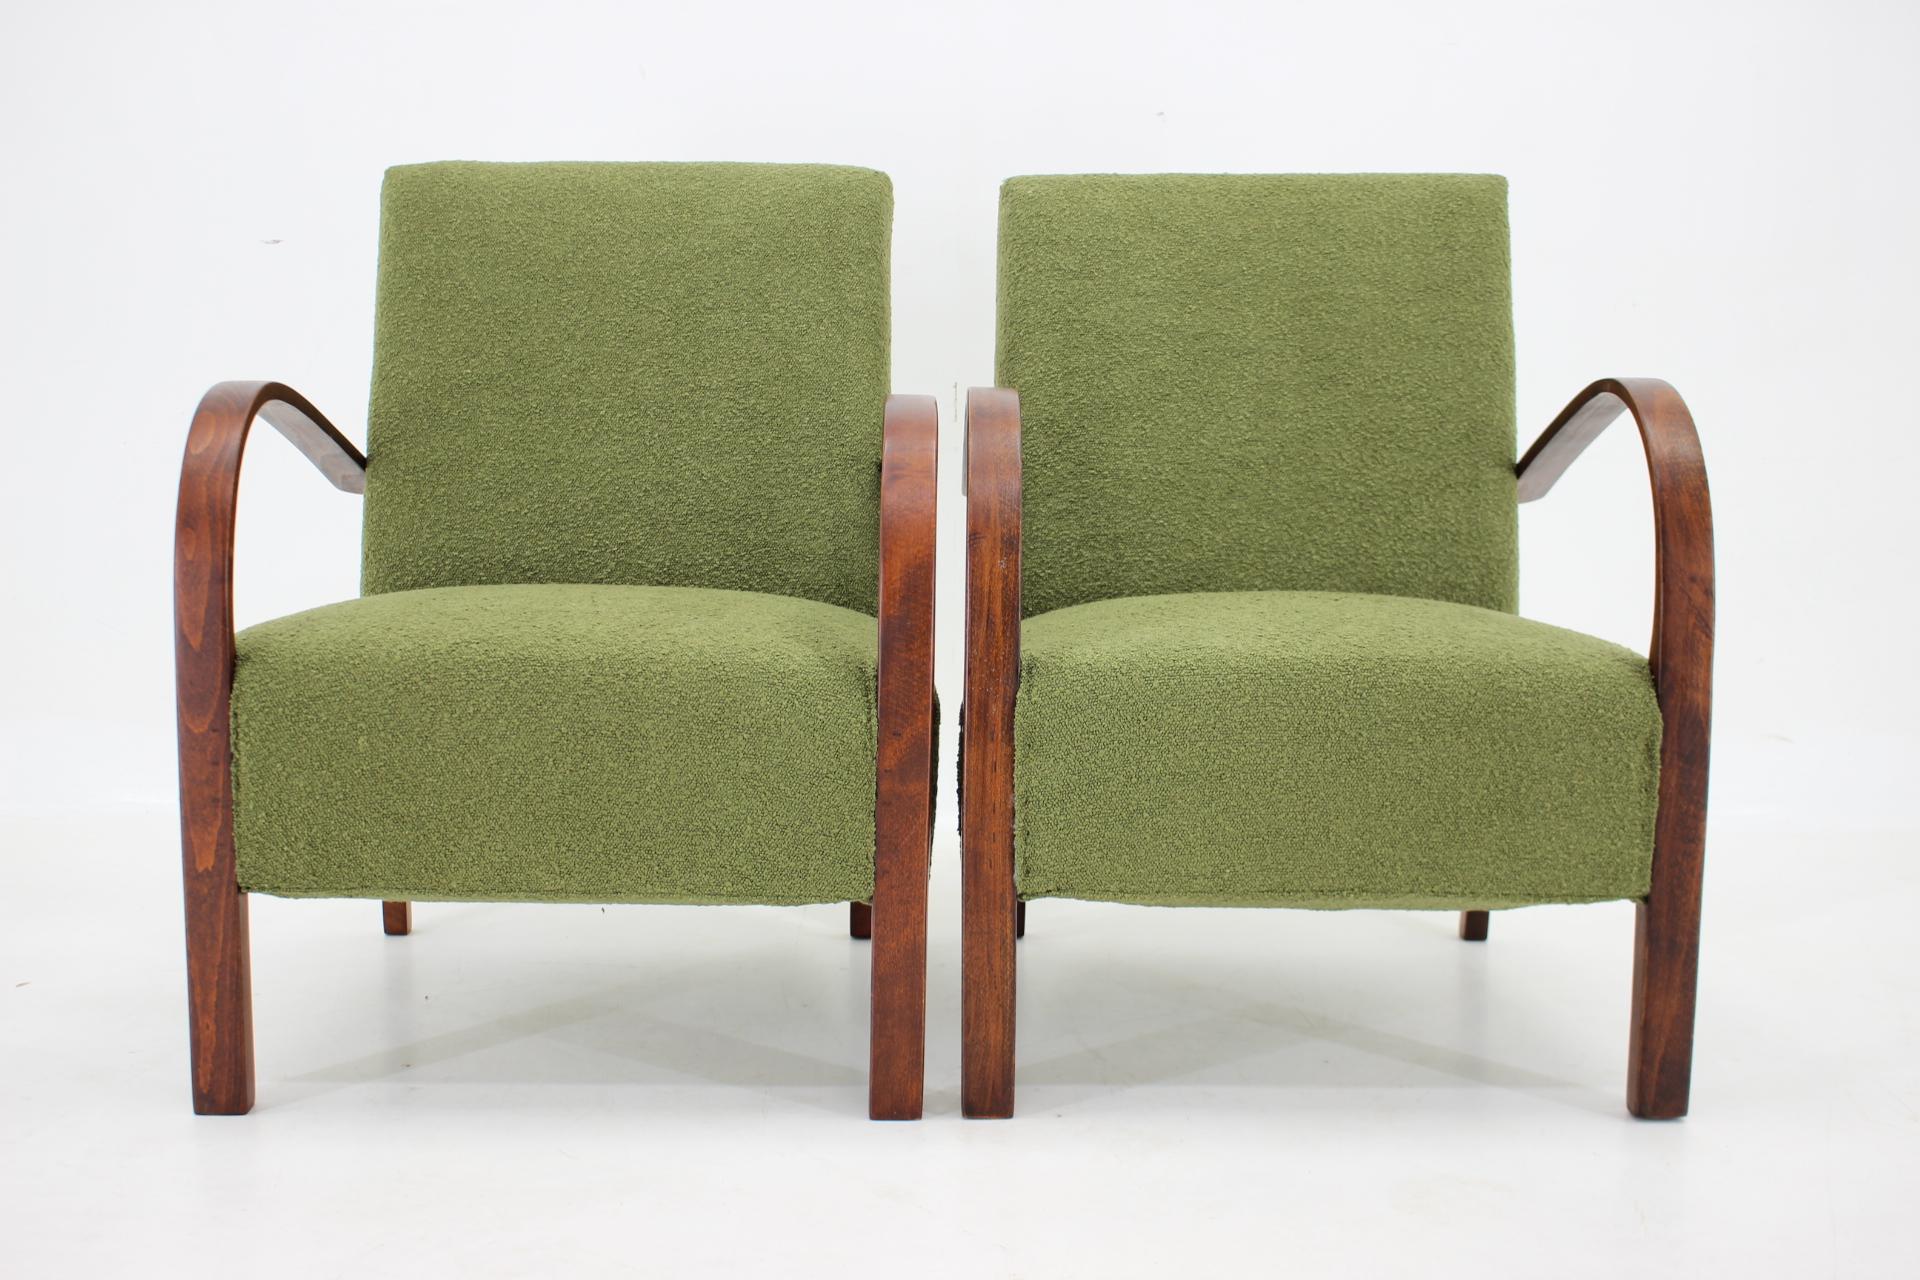 - Carefully refurbished 
- Newly upholstered in green boucle fabric